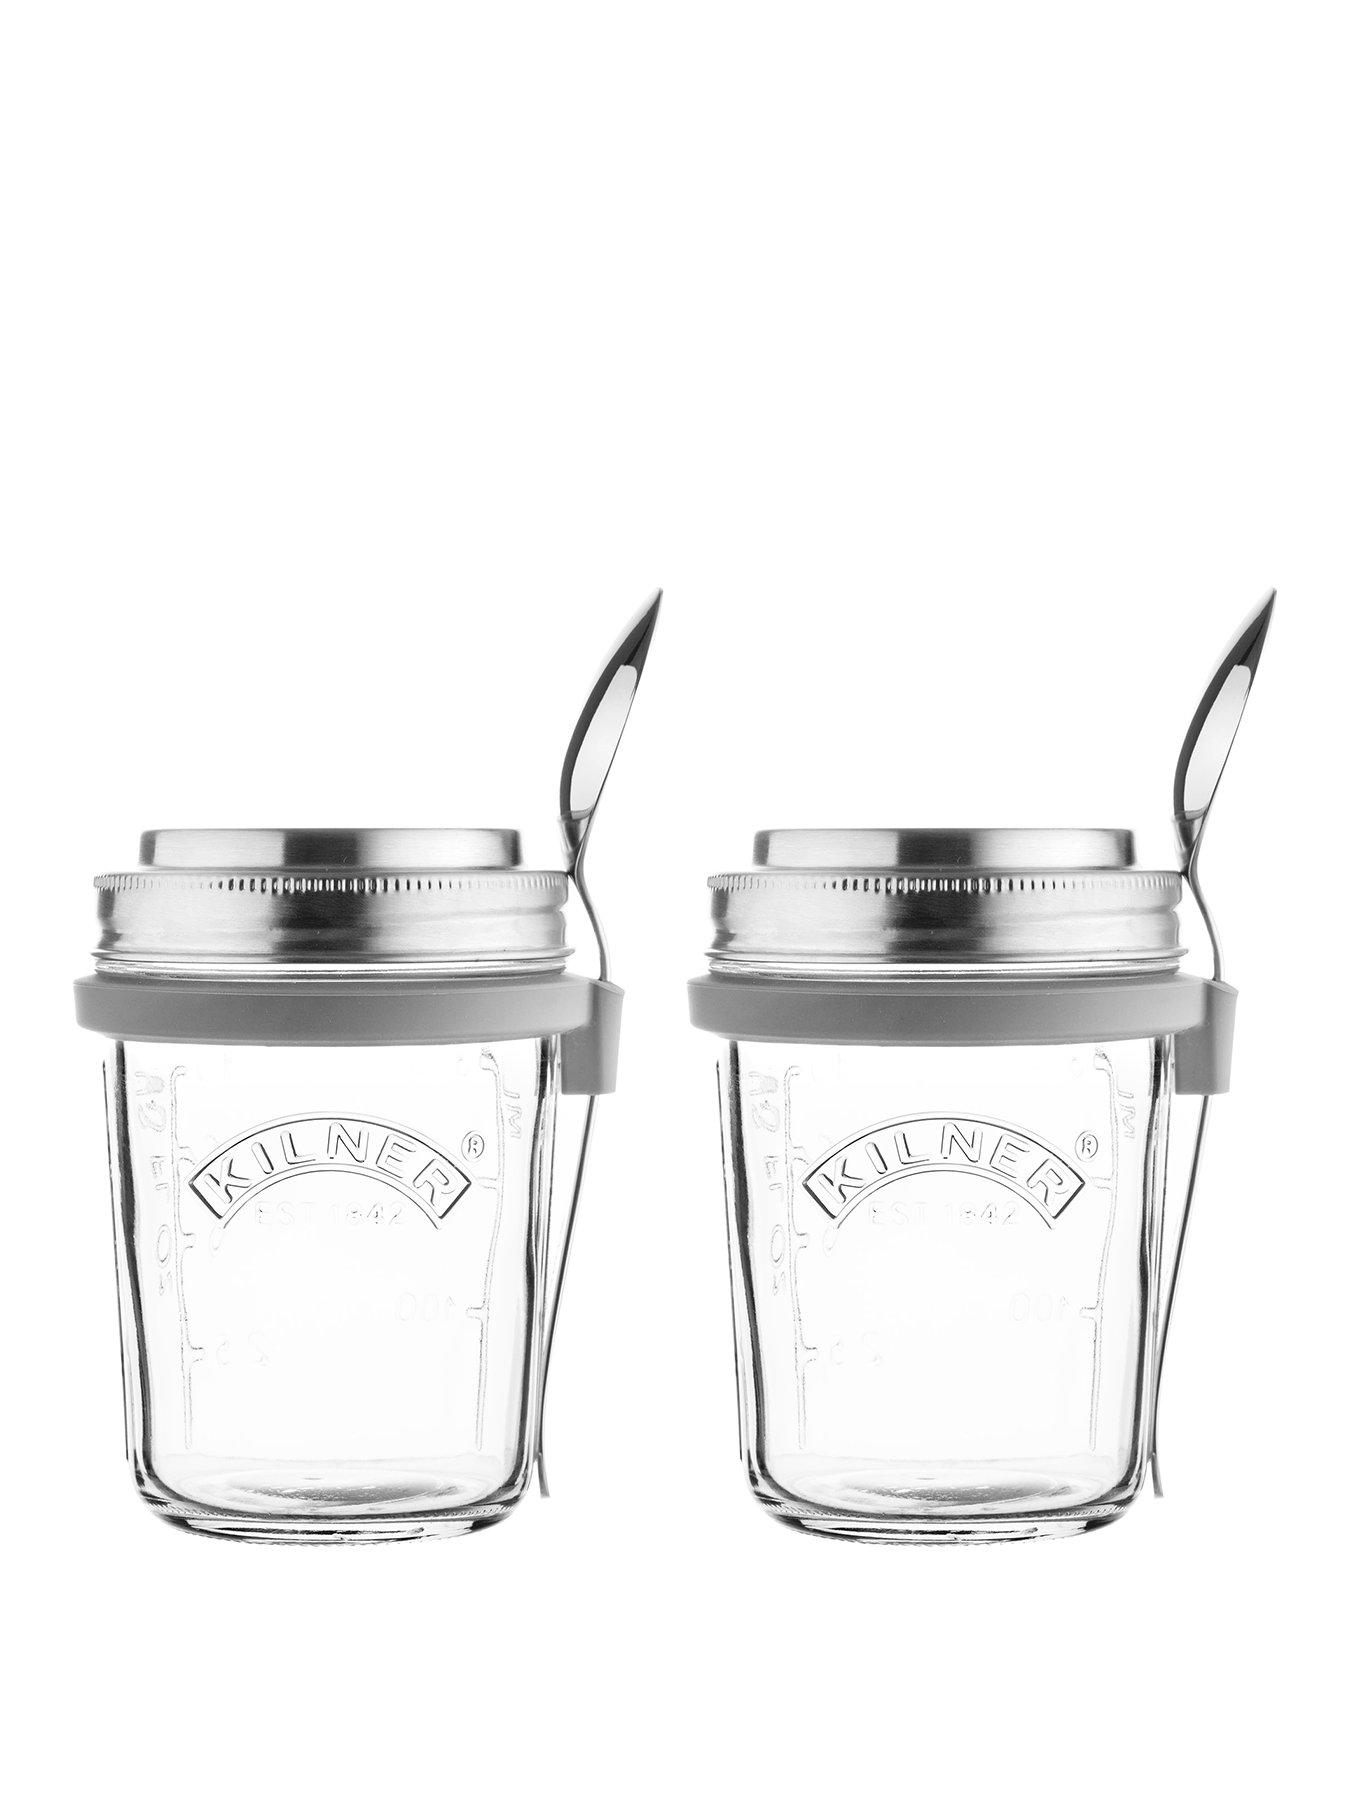 BPFY 4 Pack 32 oz Glass Jars With Airtight Lids And Leak Proof Rubber  Gasket, Wide Mouth Mason Jars with Hinged Lids for Food Storage, Cereal,  Pasta